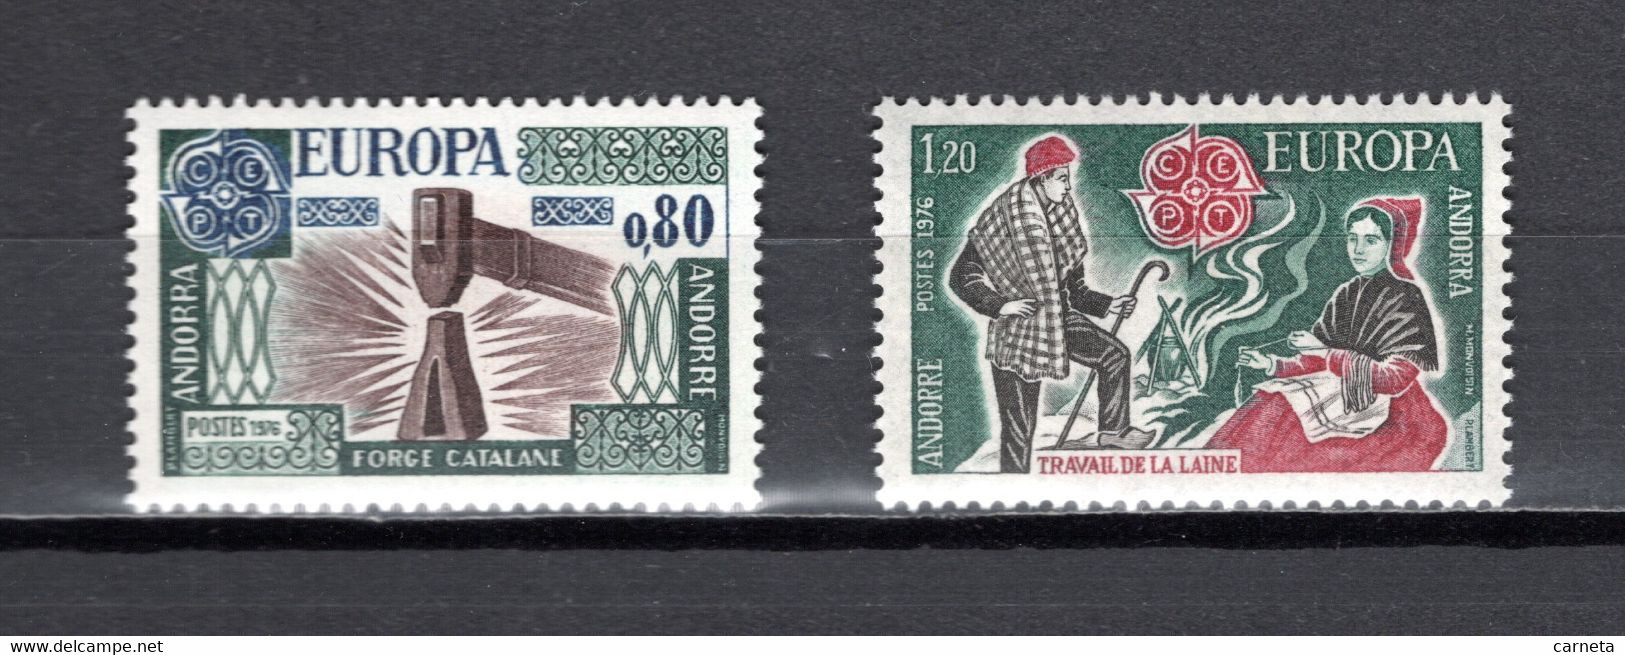 ANDORRE N° 253 + 254  NEUFS SANS CHARNIERE COTE 14.00€  EUROPA  ARTISANAT - Unused Stamps